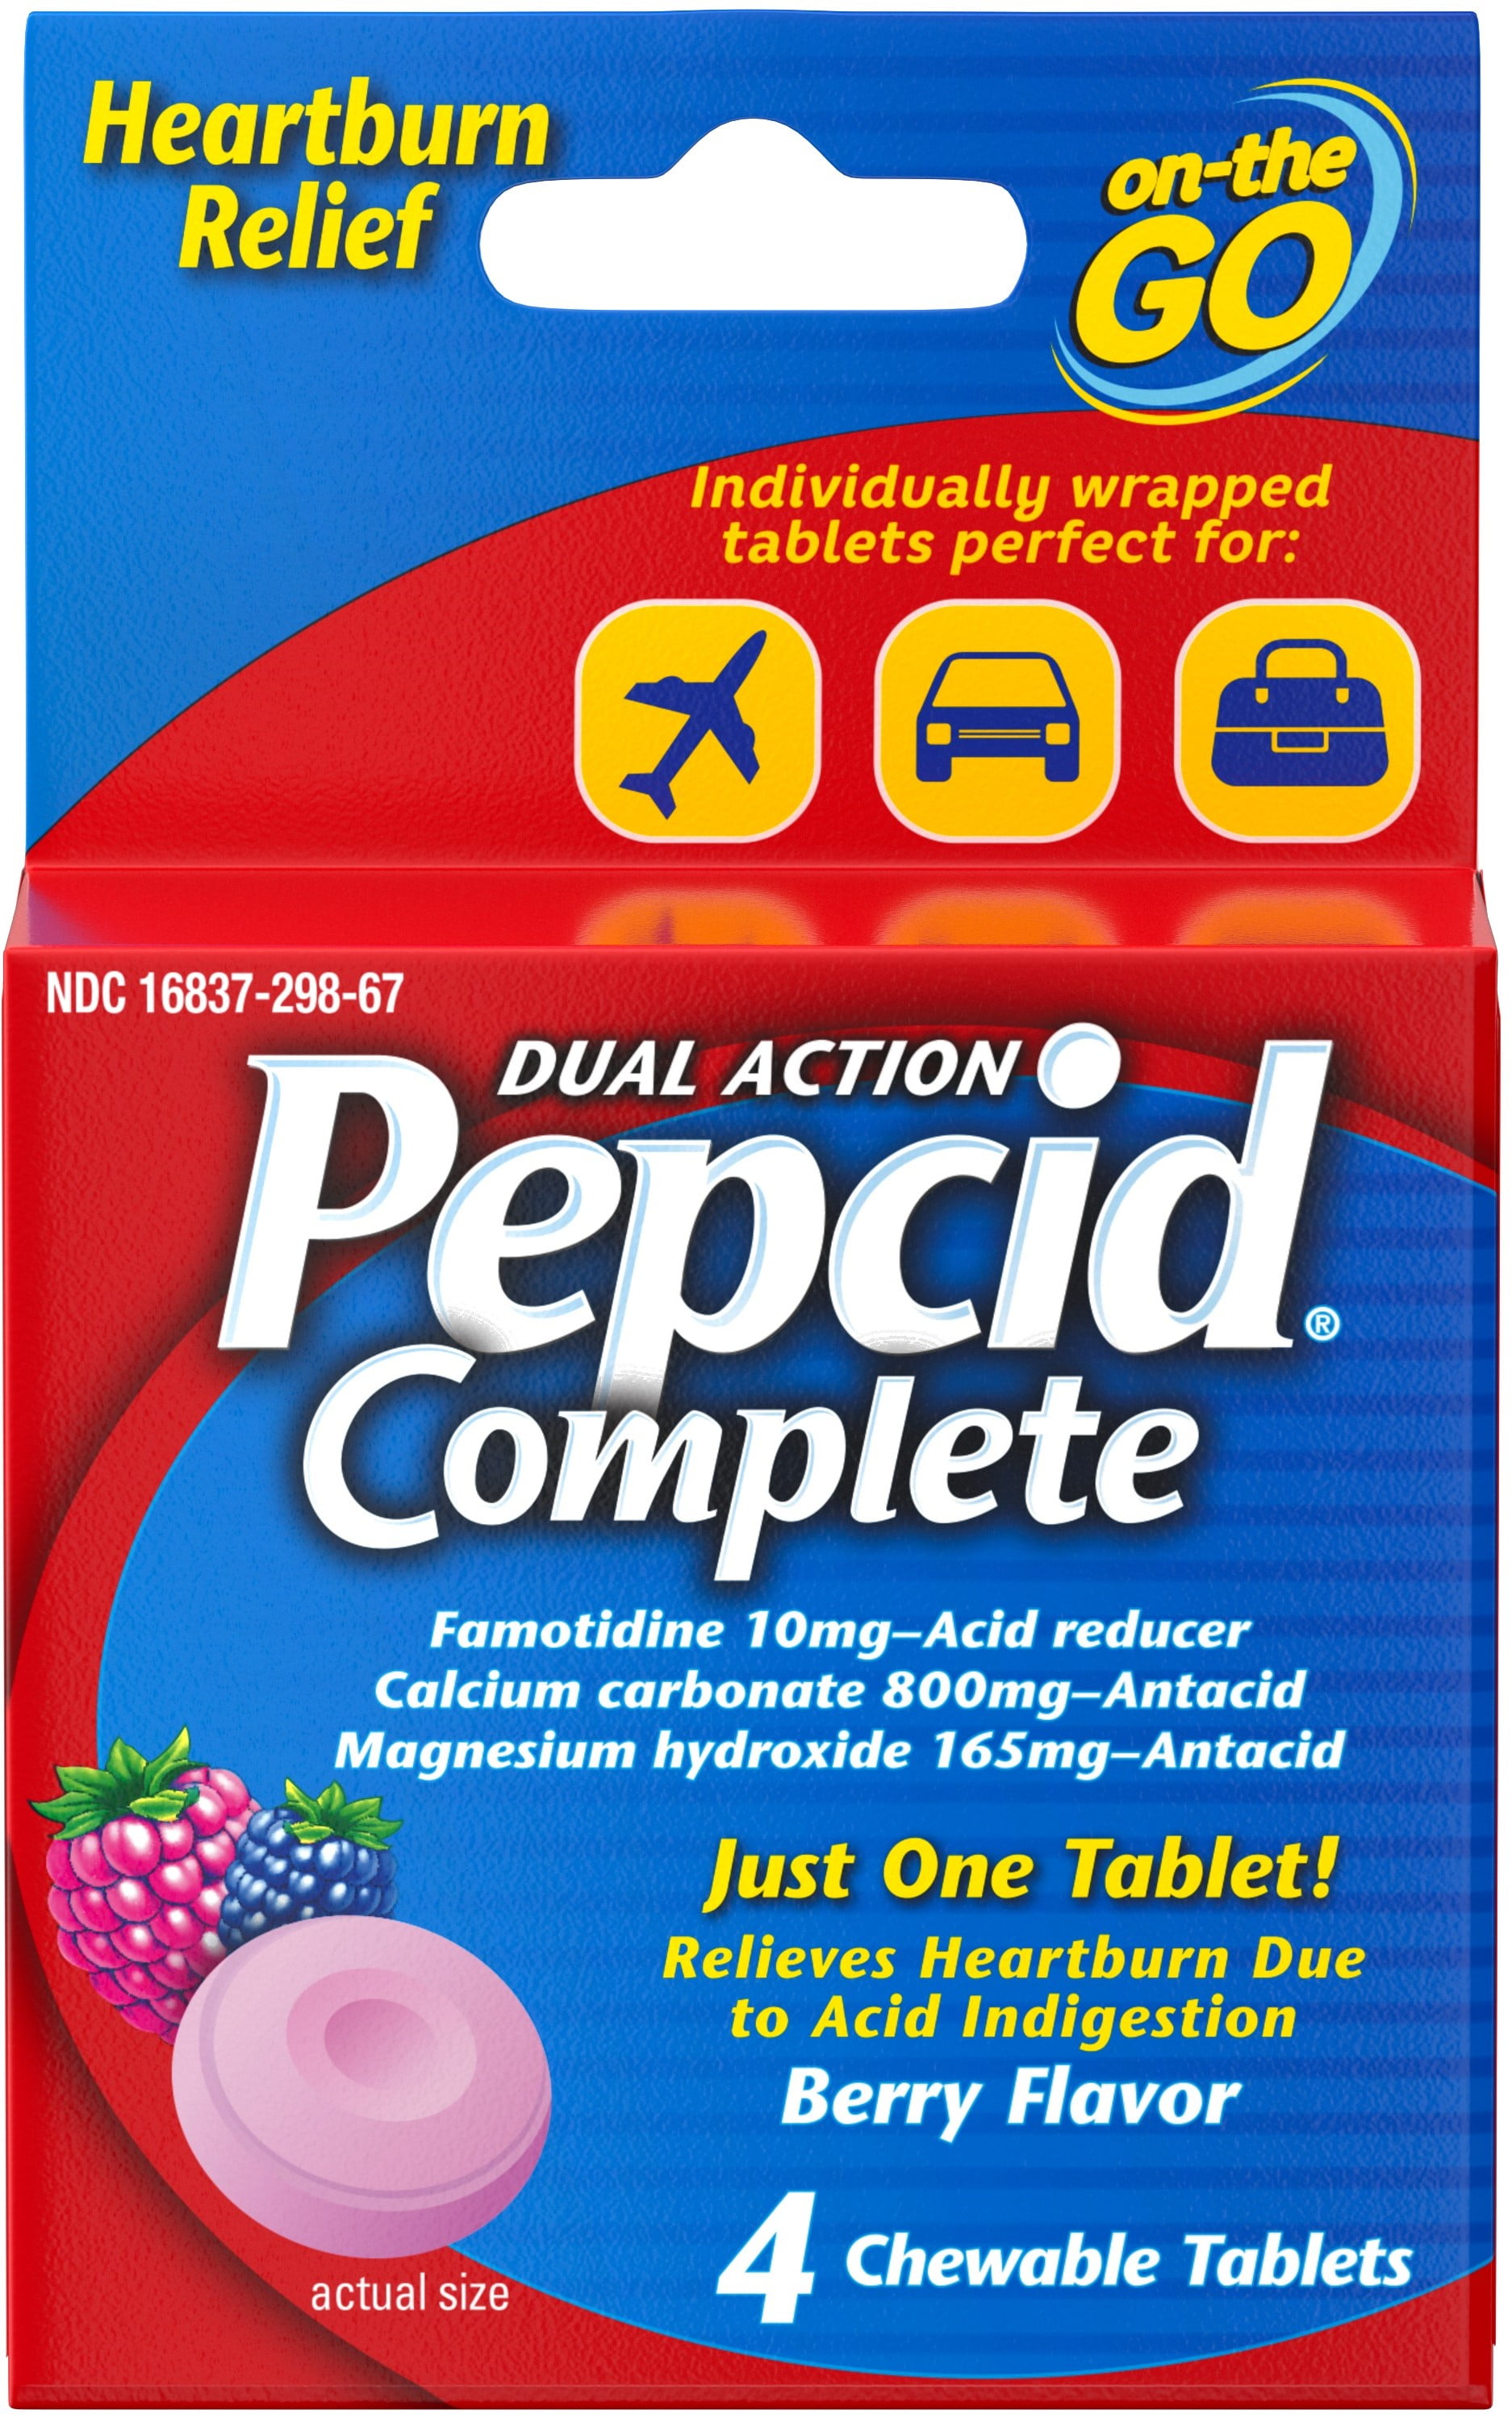 is there a generic for pepcid complete